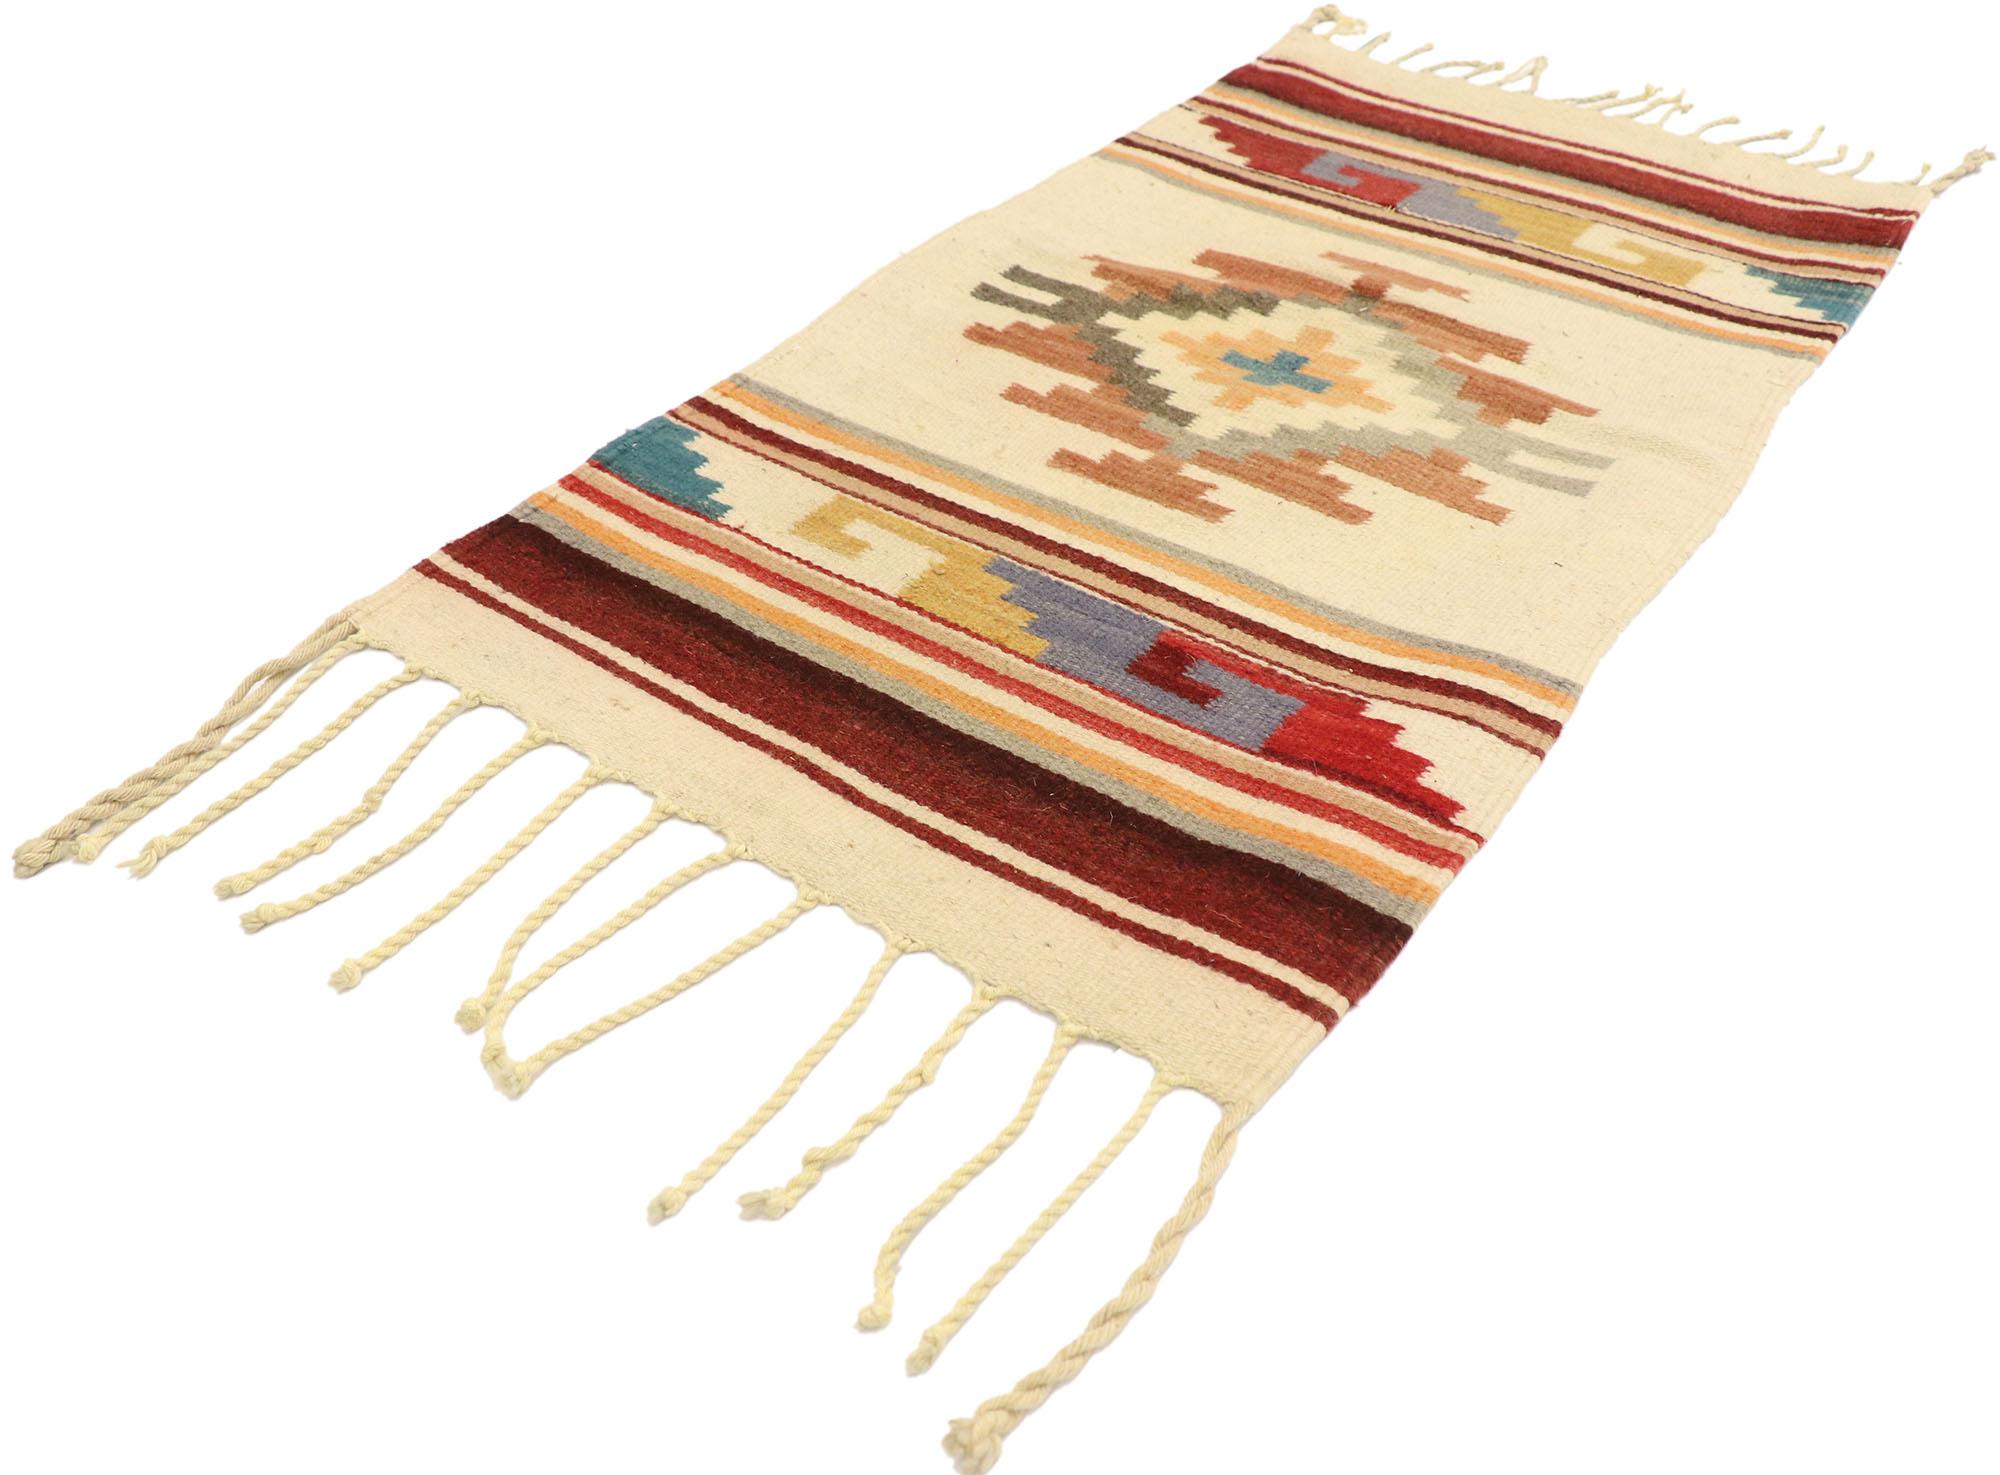 77961 Vintage New Mexico Kilim Rug with Southwestern Style, 01'09 x 03'02. With its expressive design, incredible detail and texture, this hand-woven wool vintage New Mexico Kilim rug is a captivating vision of woven beauty. The abrashed beige field